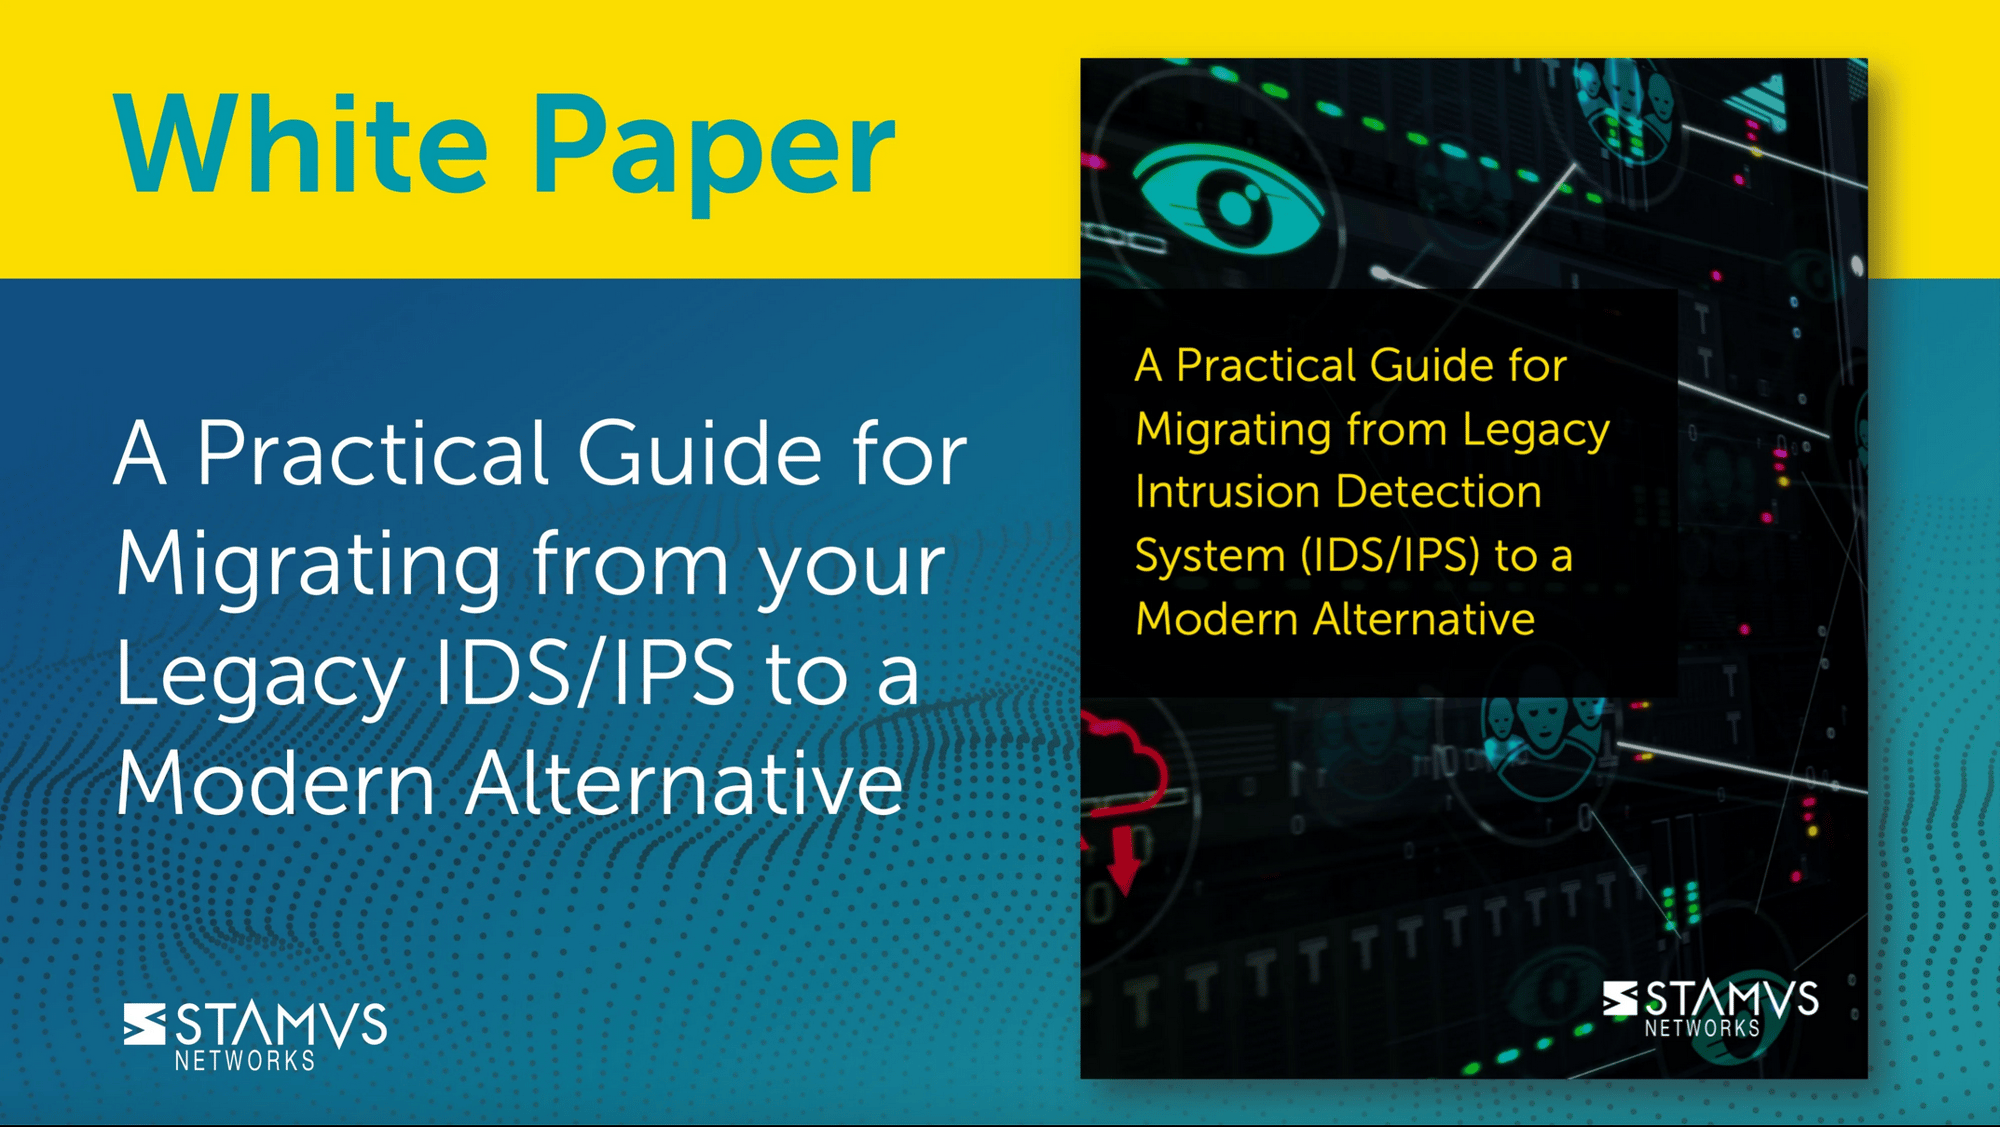 A Practical Guide for Migrating from your Legacy IDS/IPS